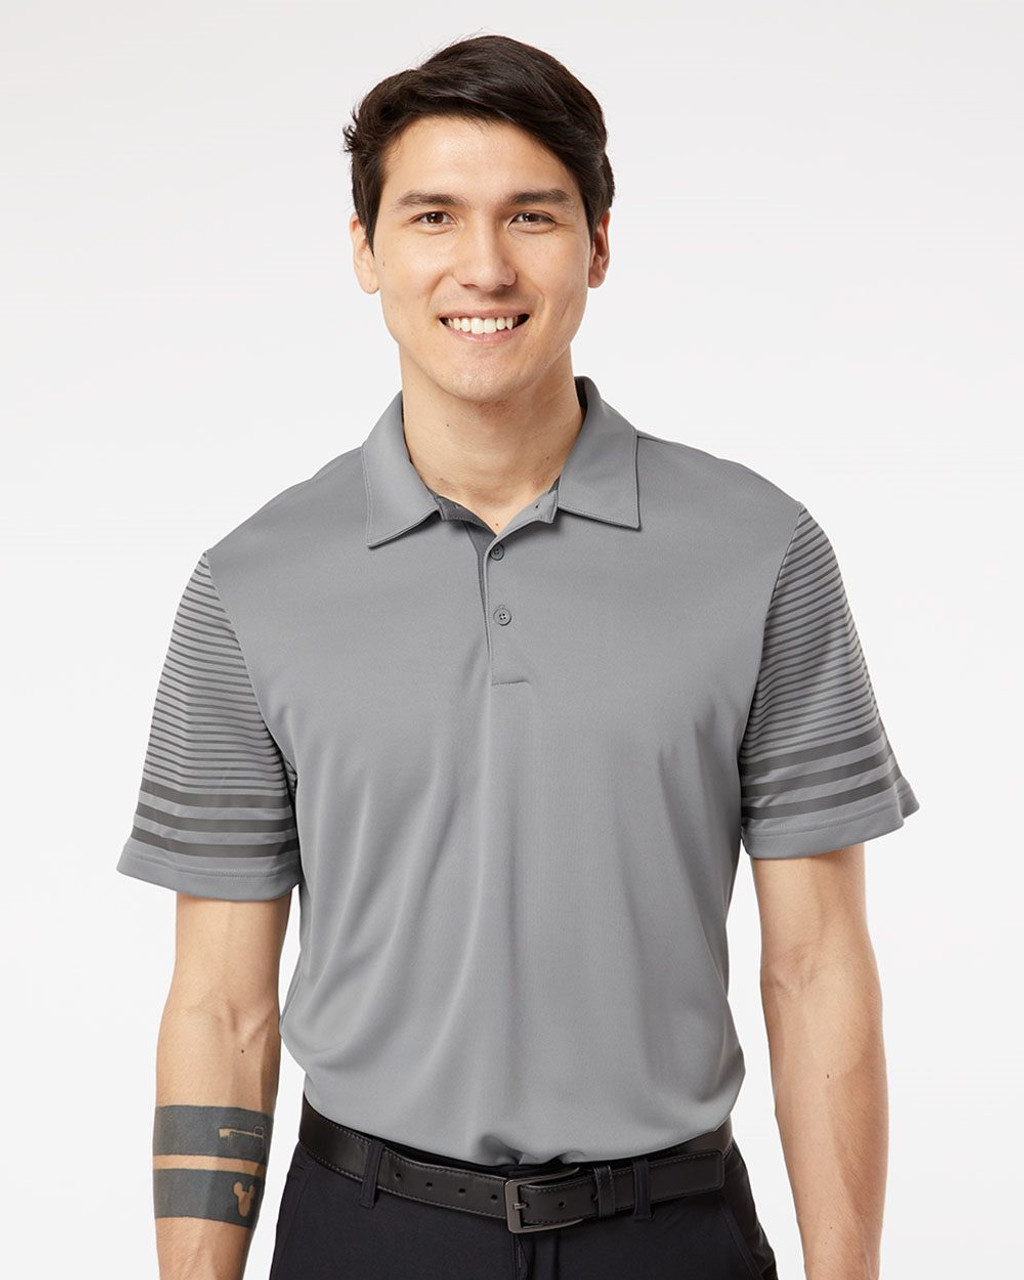 Embroidered Striped Sleeve Polo - A490